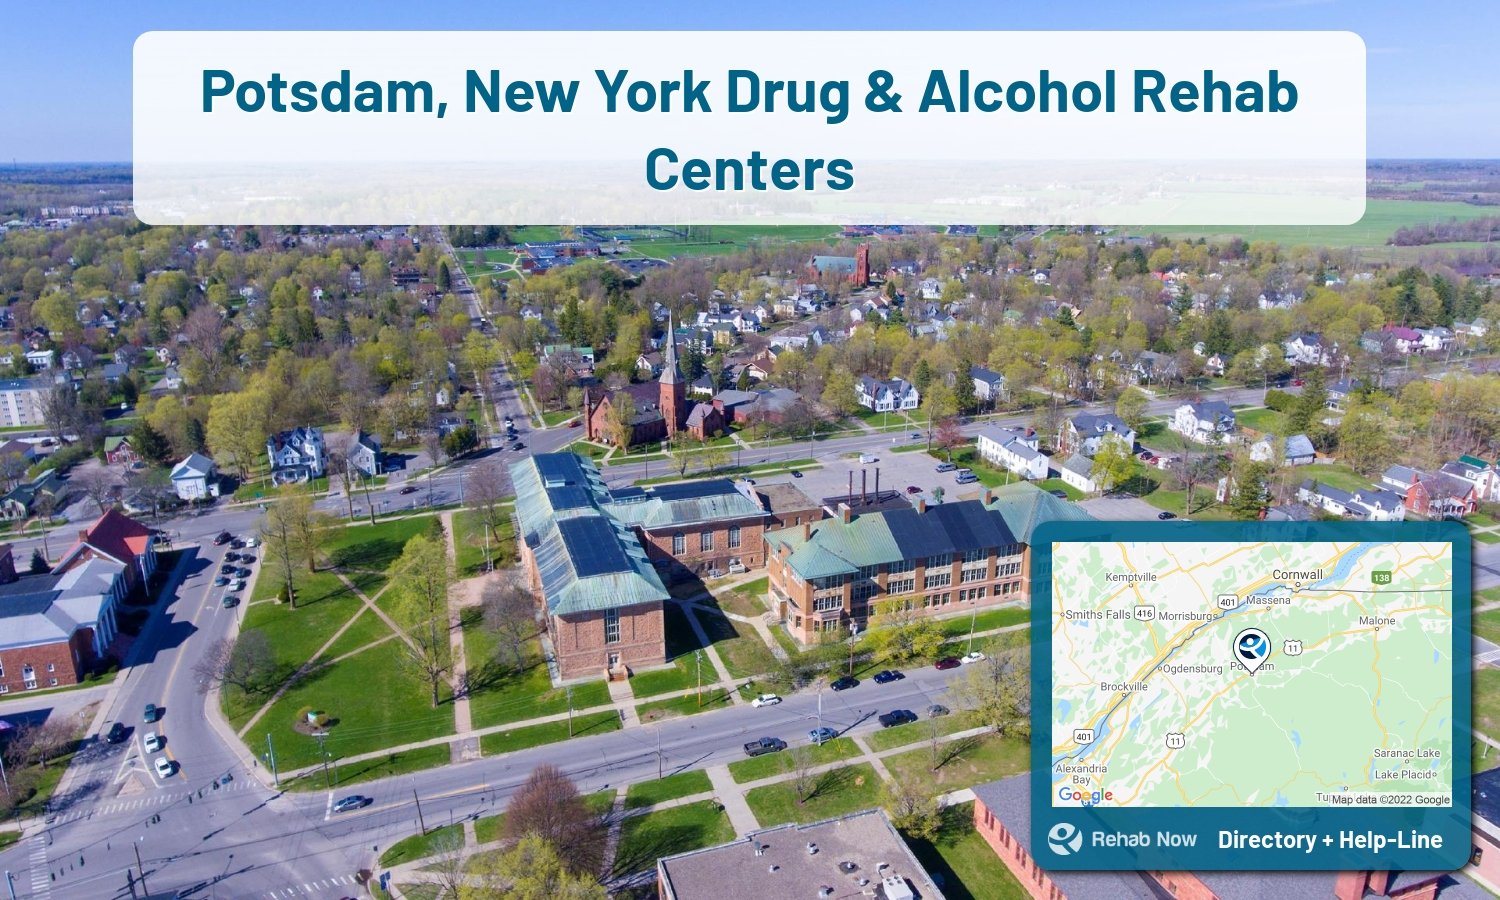 Potsdam, NY Treatment Centers. Find drug rehab in Potsdam, New York, or detox and treatment programs. Get the right help now!